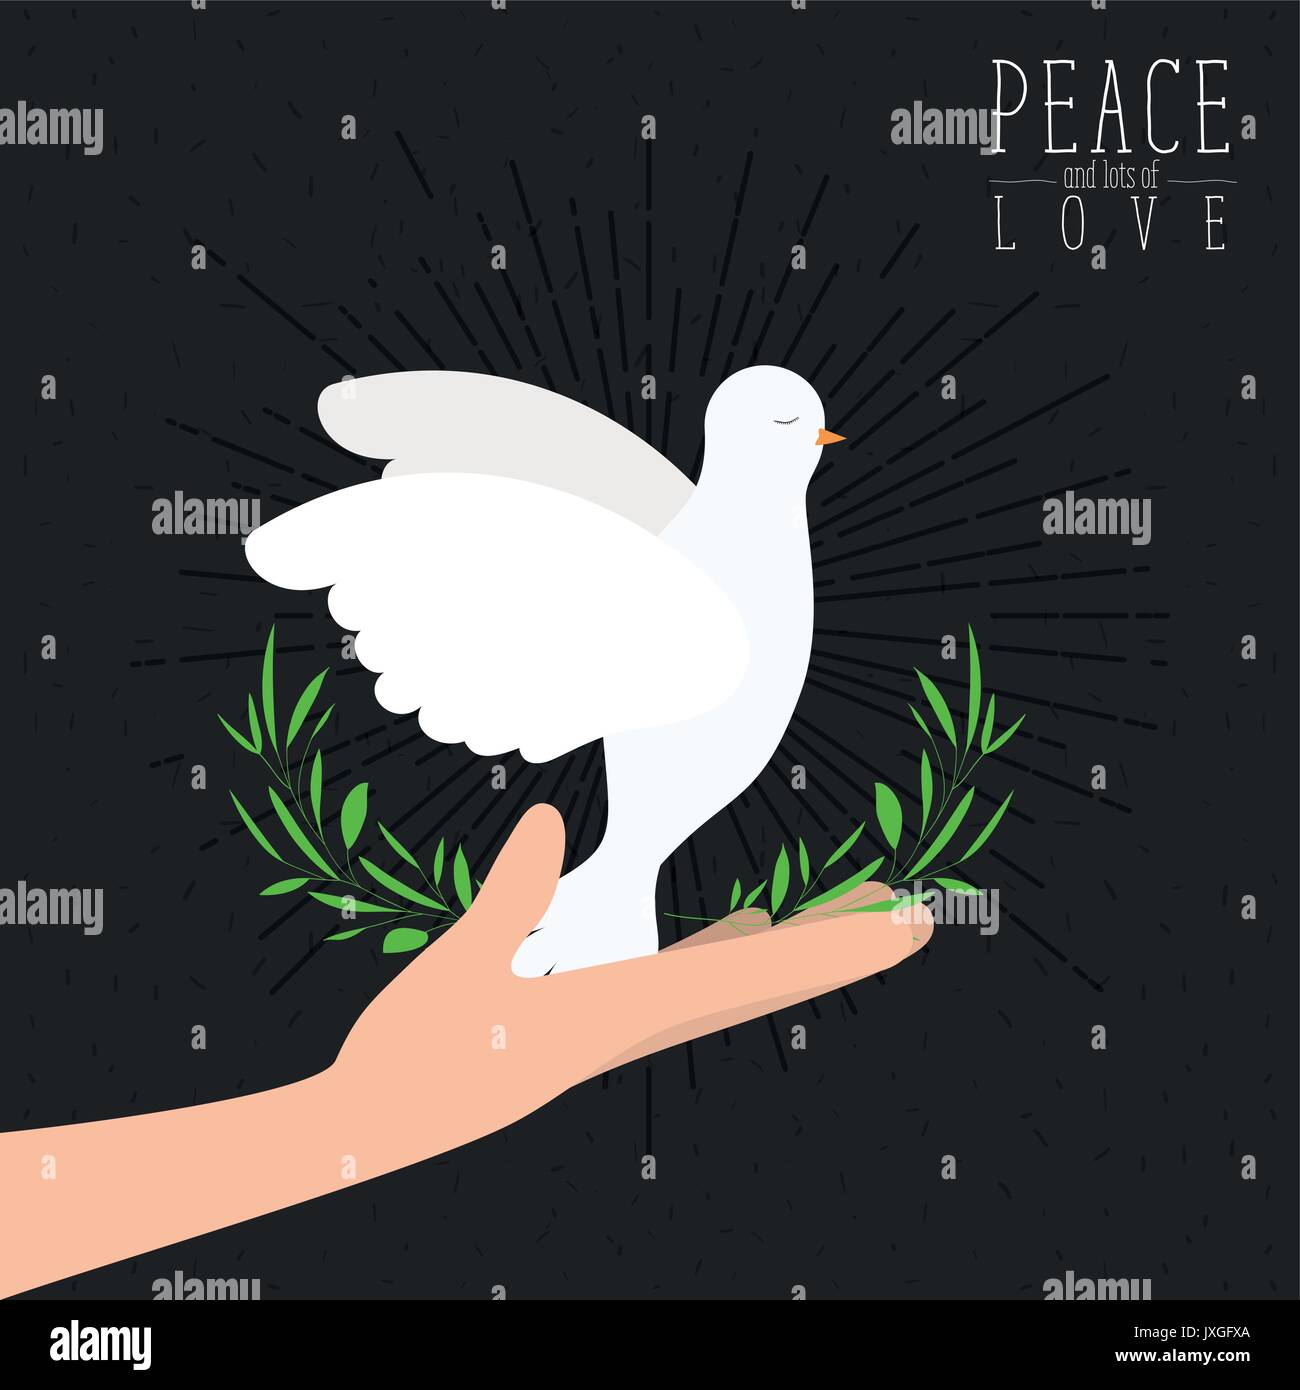 black color poster with sparks and hand holding a pigeon with olive branch in peak with decorative half crown of leaves and text peace a lots of love with linear brightness vector illustration Stock Vector